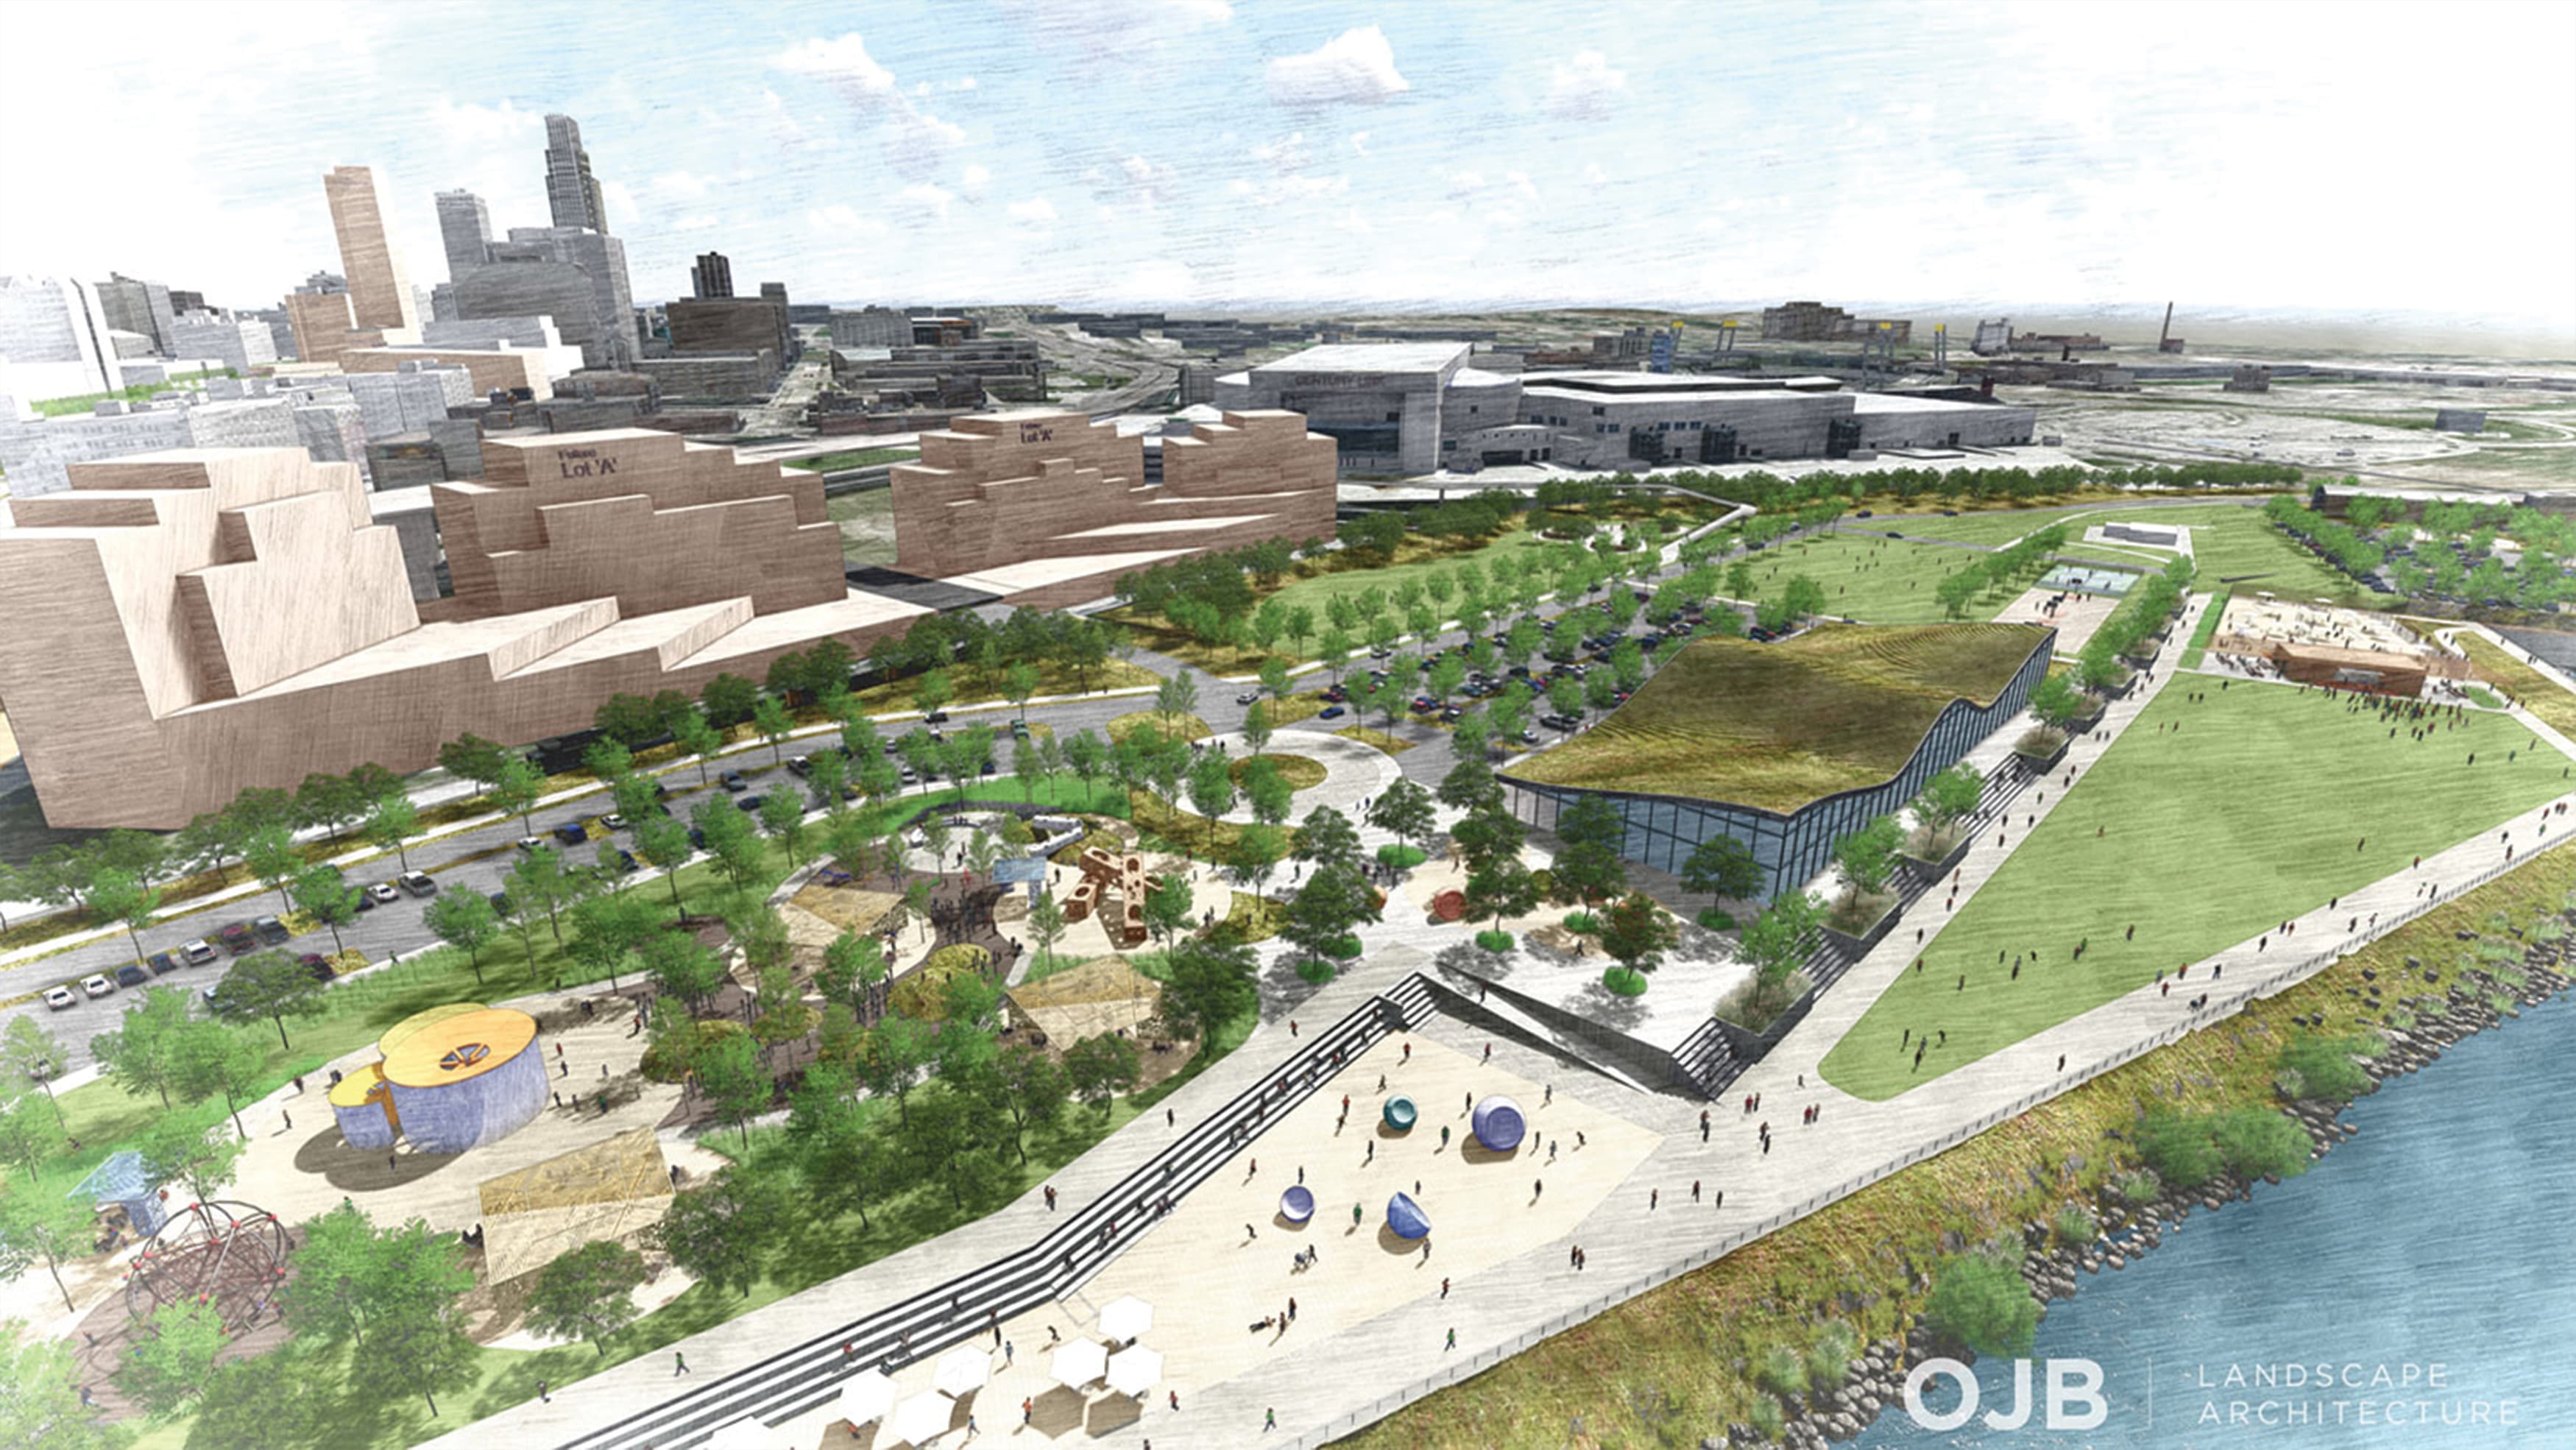 A rendering of the Missouri Riverfront Revitalization Project depicting expanses of open space, play areas, and buildings.